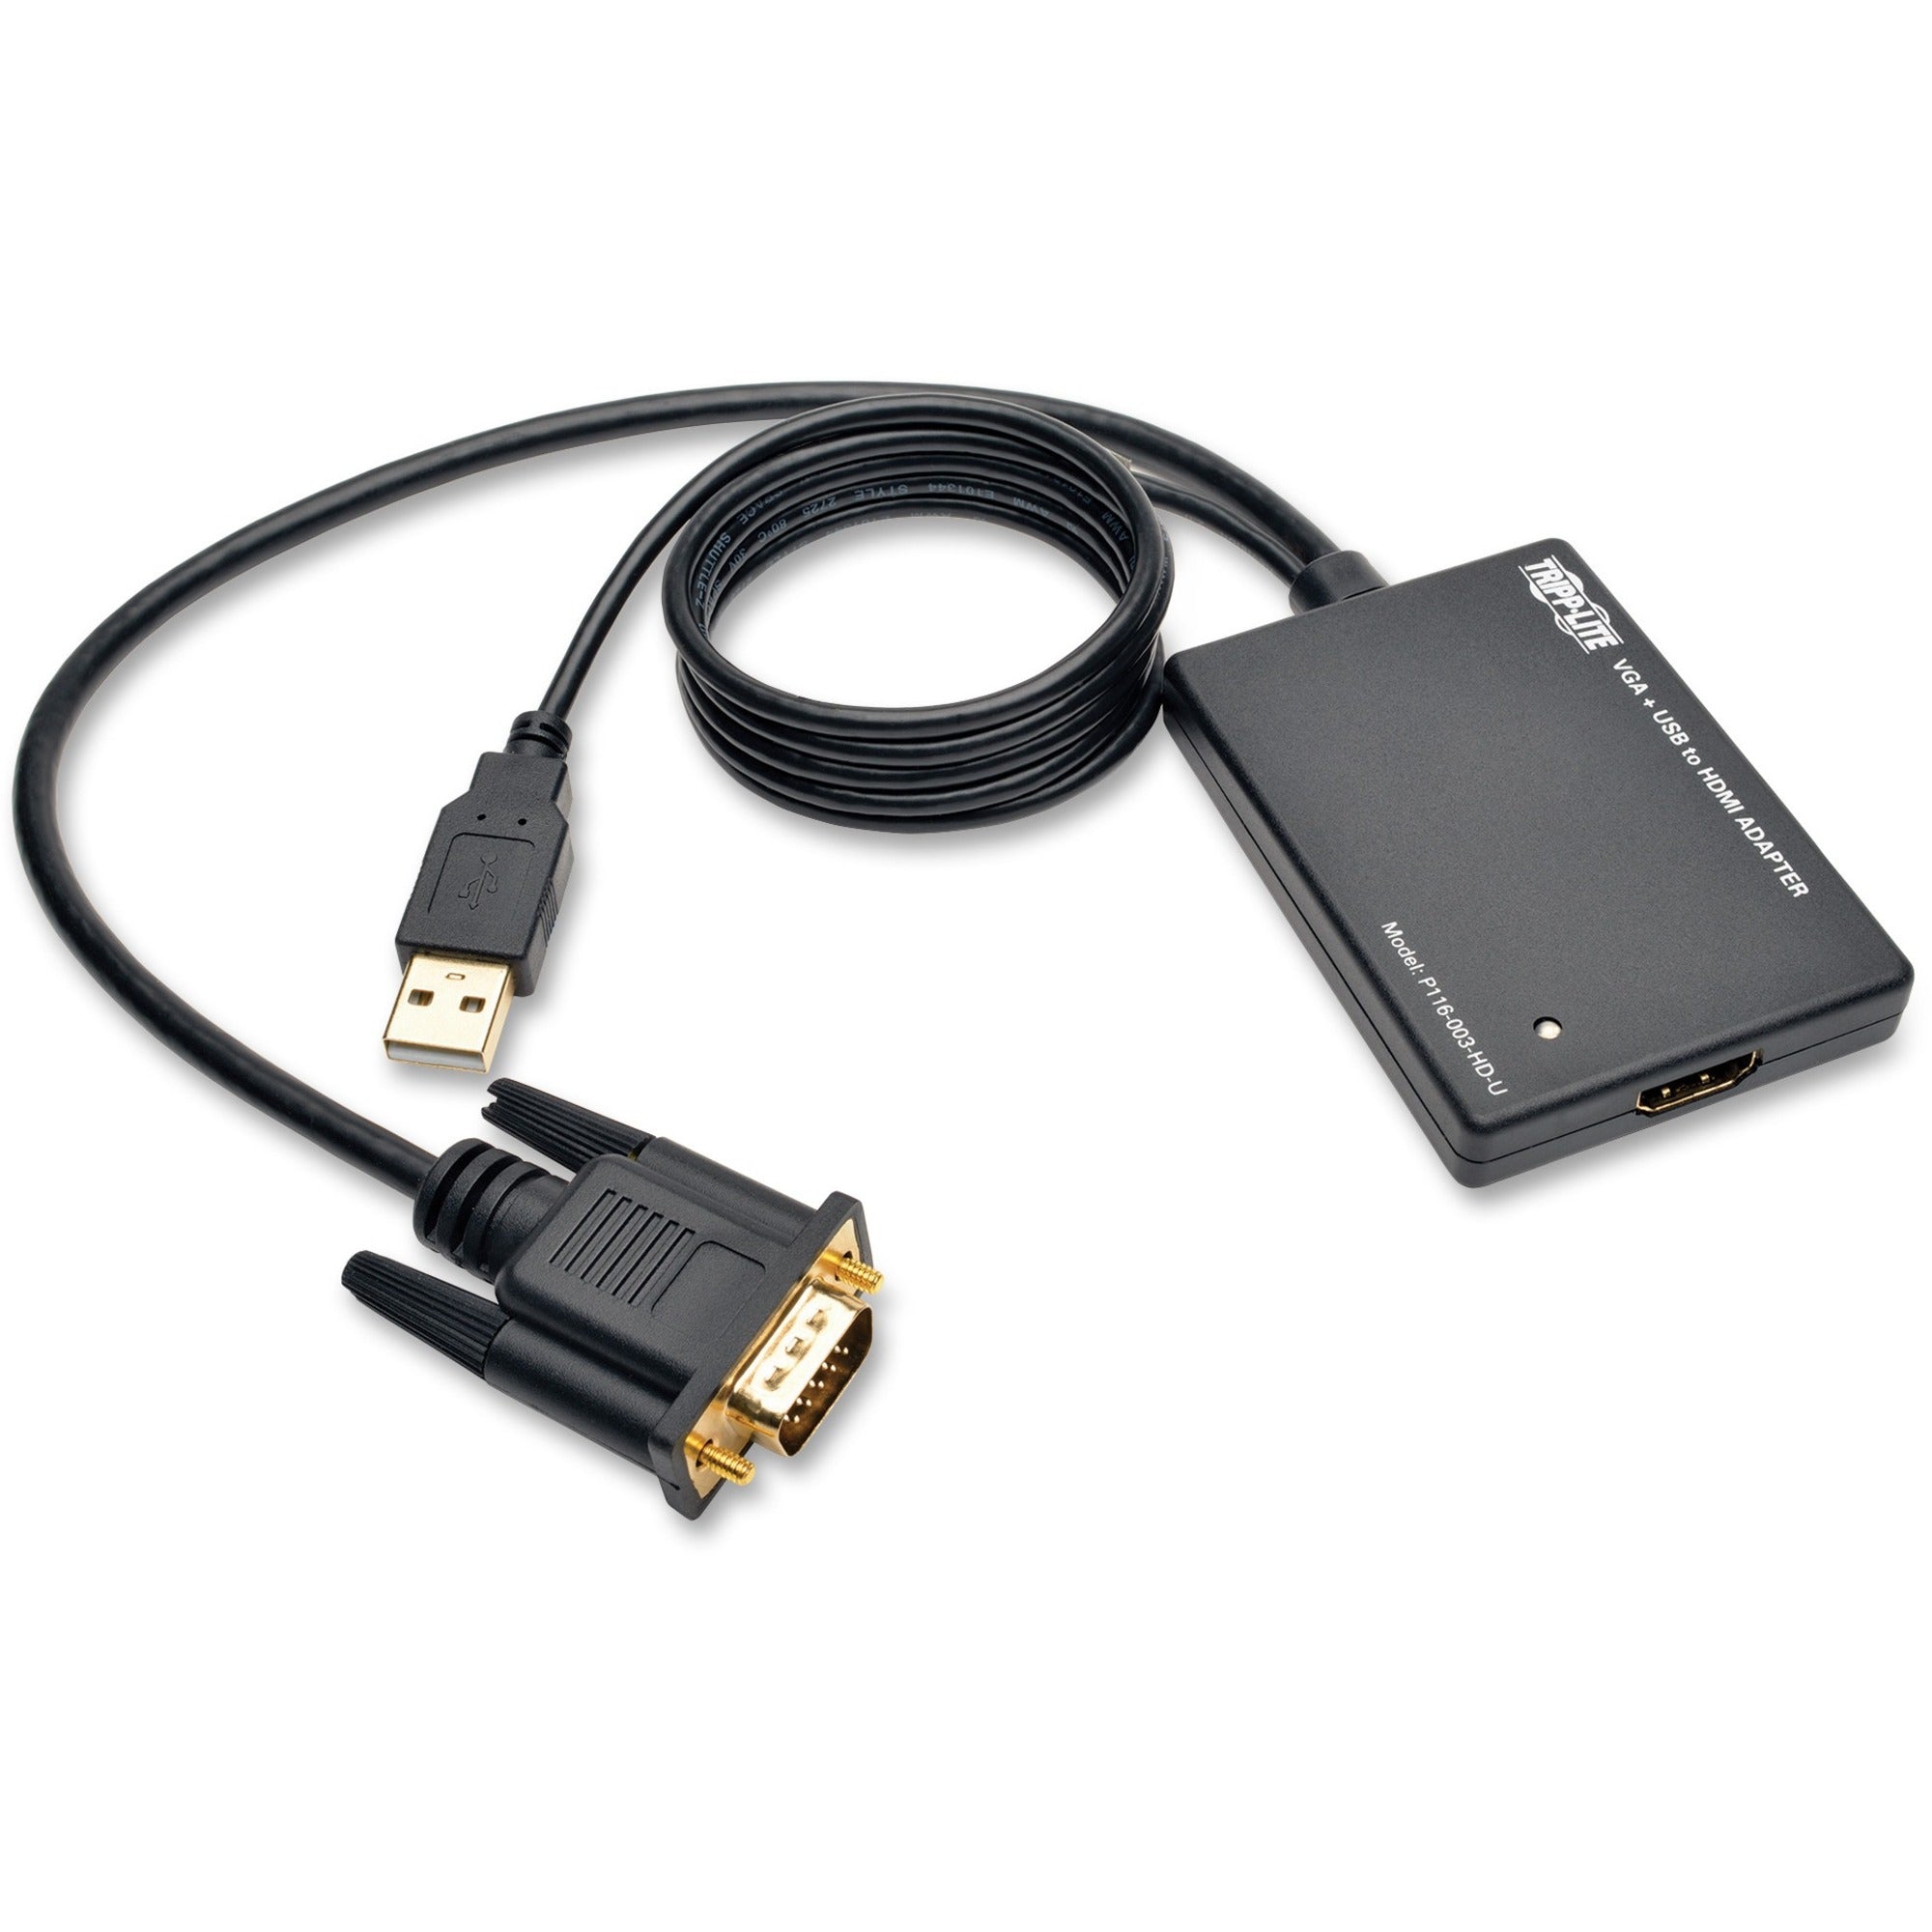 tripp-lite-by-eaton-vga-to-hdmi-active-adapter-cable-with-audio-and-usb-power-m-f-1080p-6-in-152-cm-functions-signal-conversion-1920-x-1080-vga-usb-1-pack-external_trpp116003hdu - 1